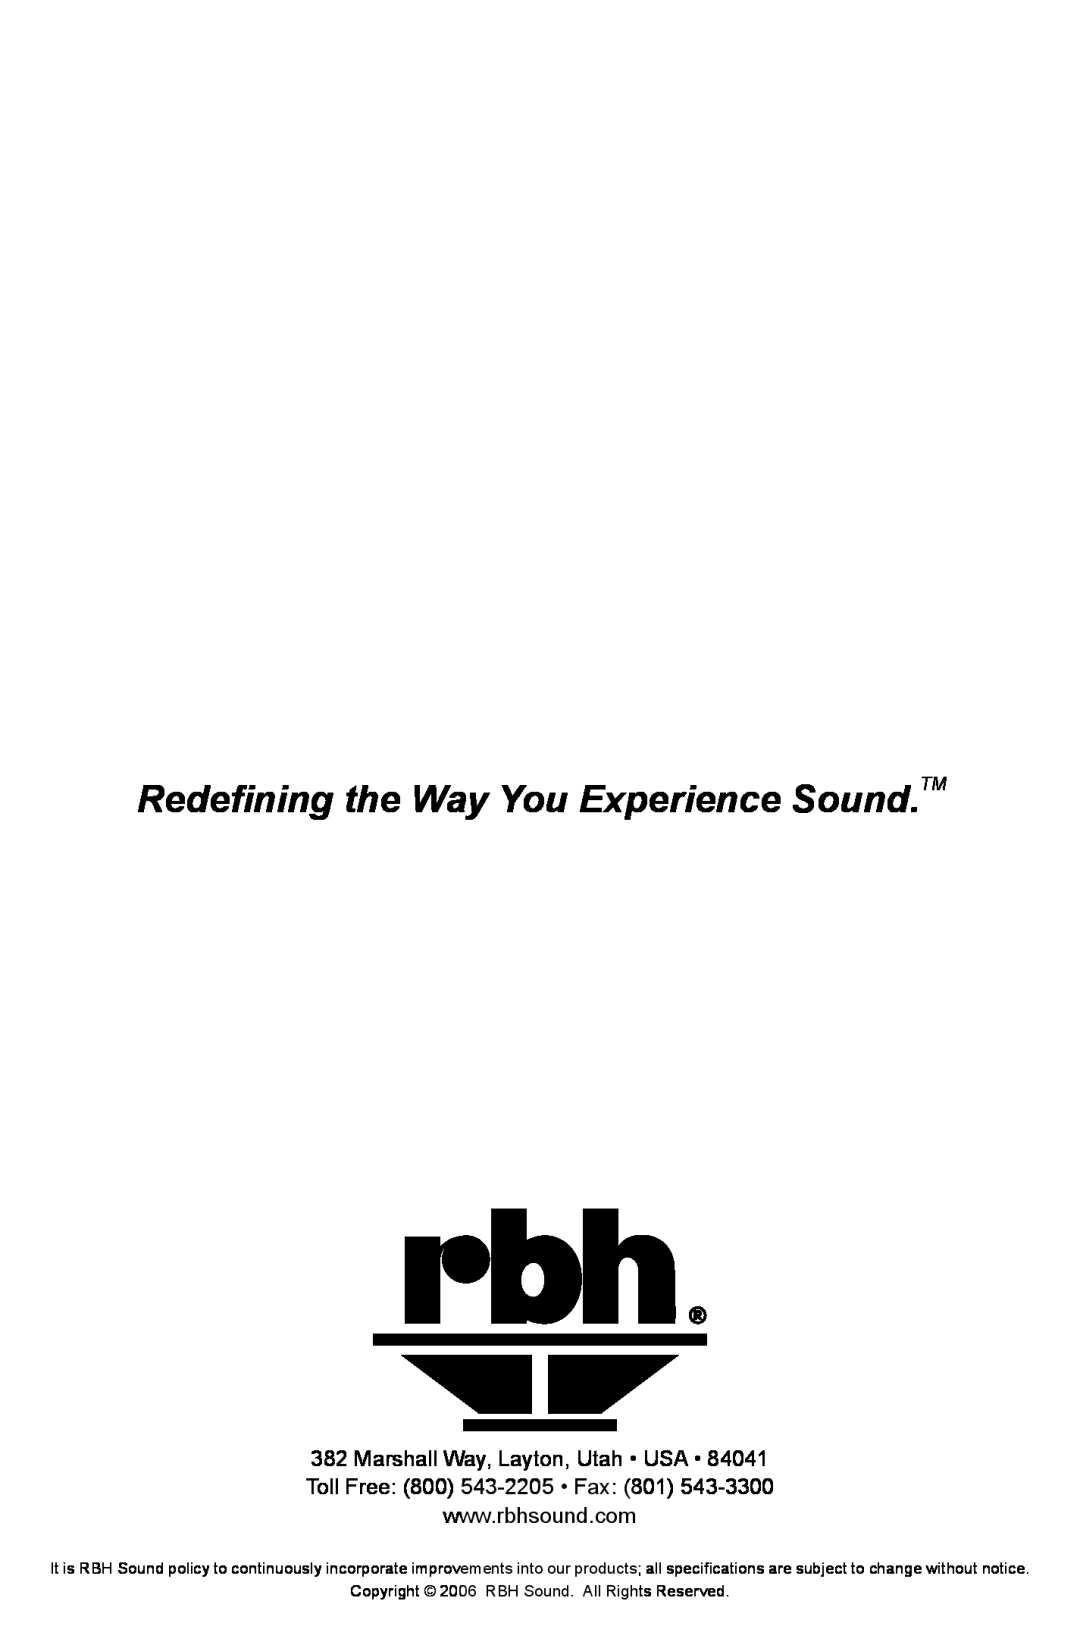 RBH Sound TK operation manual Redefining the Way You Experience Sound.TM, Copyright 2006 RBH Sound. All Rights Reserved 